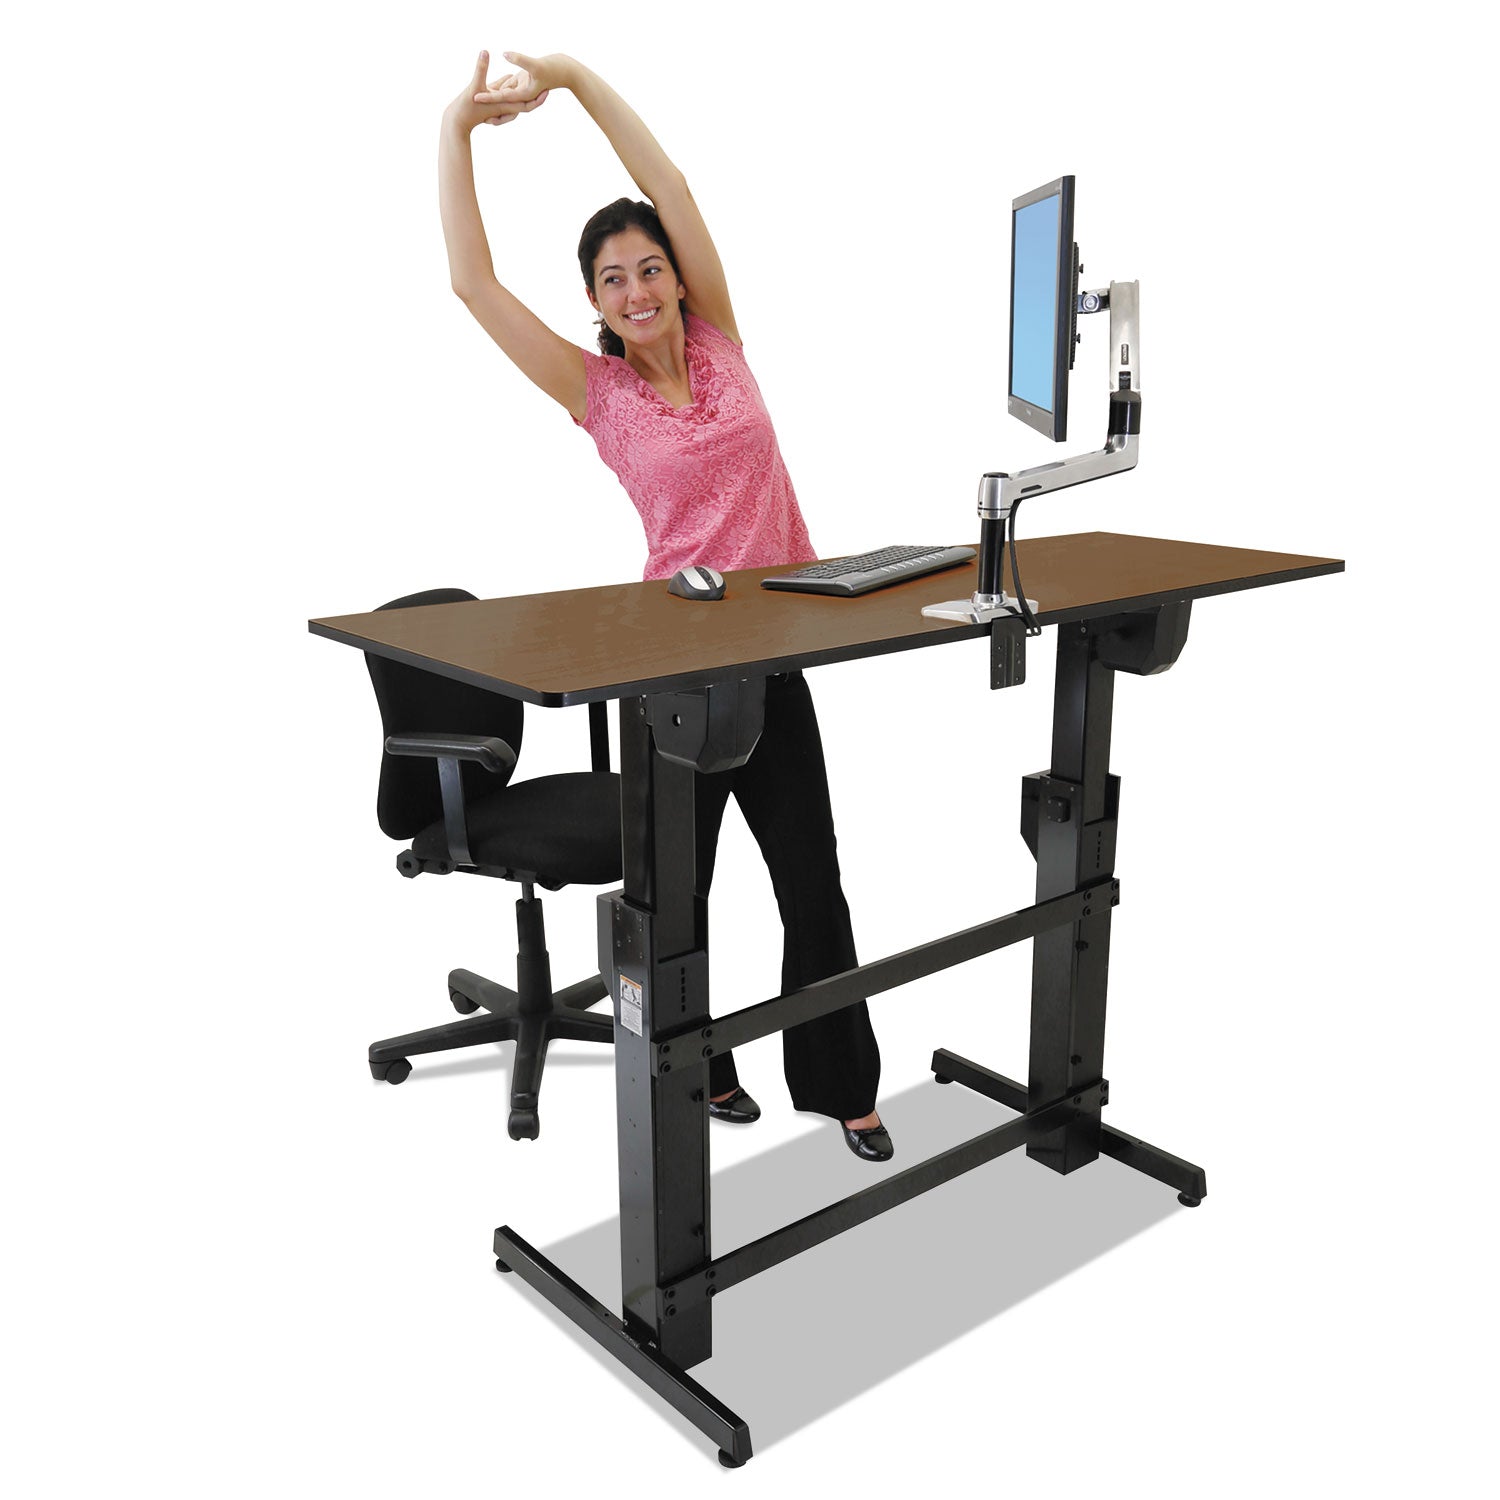 workfit-b-sit-stand-base-up-to-88-lb-42-x-26-x-32-to-515-black_erg24388009 - 4